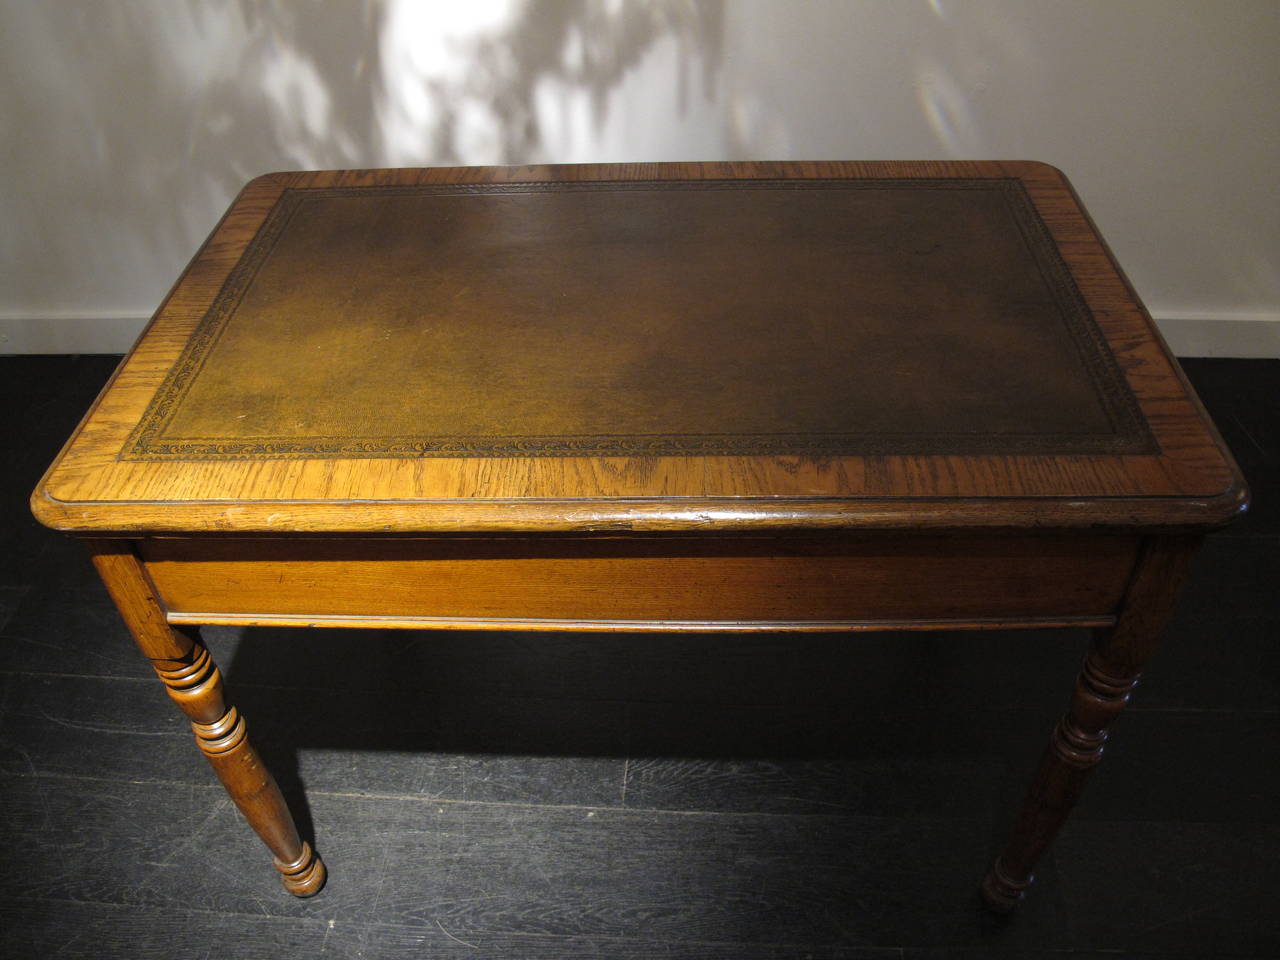 An original 19th century oak metamorphic library steps or writing table.
This example was made in the Victorian Period, to use as writing table with the leather insert top and as library steps. It is very solid, stabile and ready to